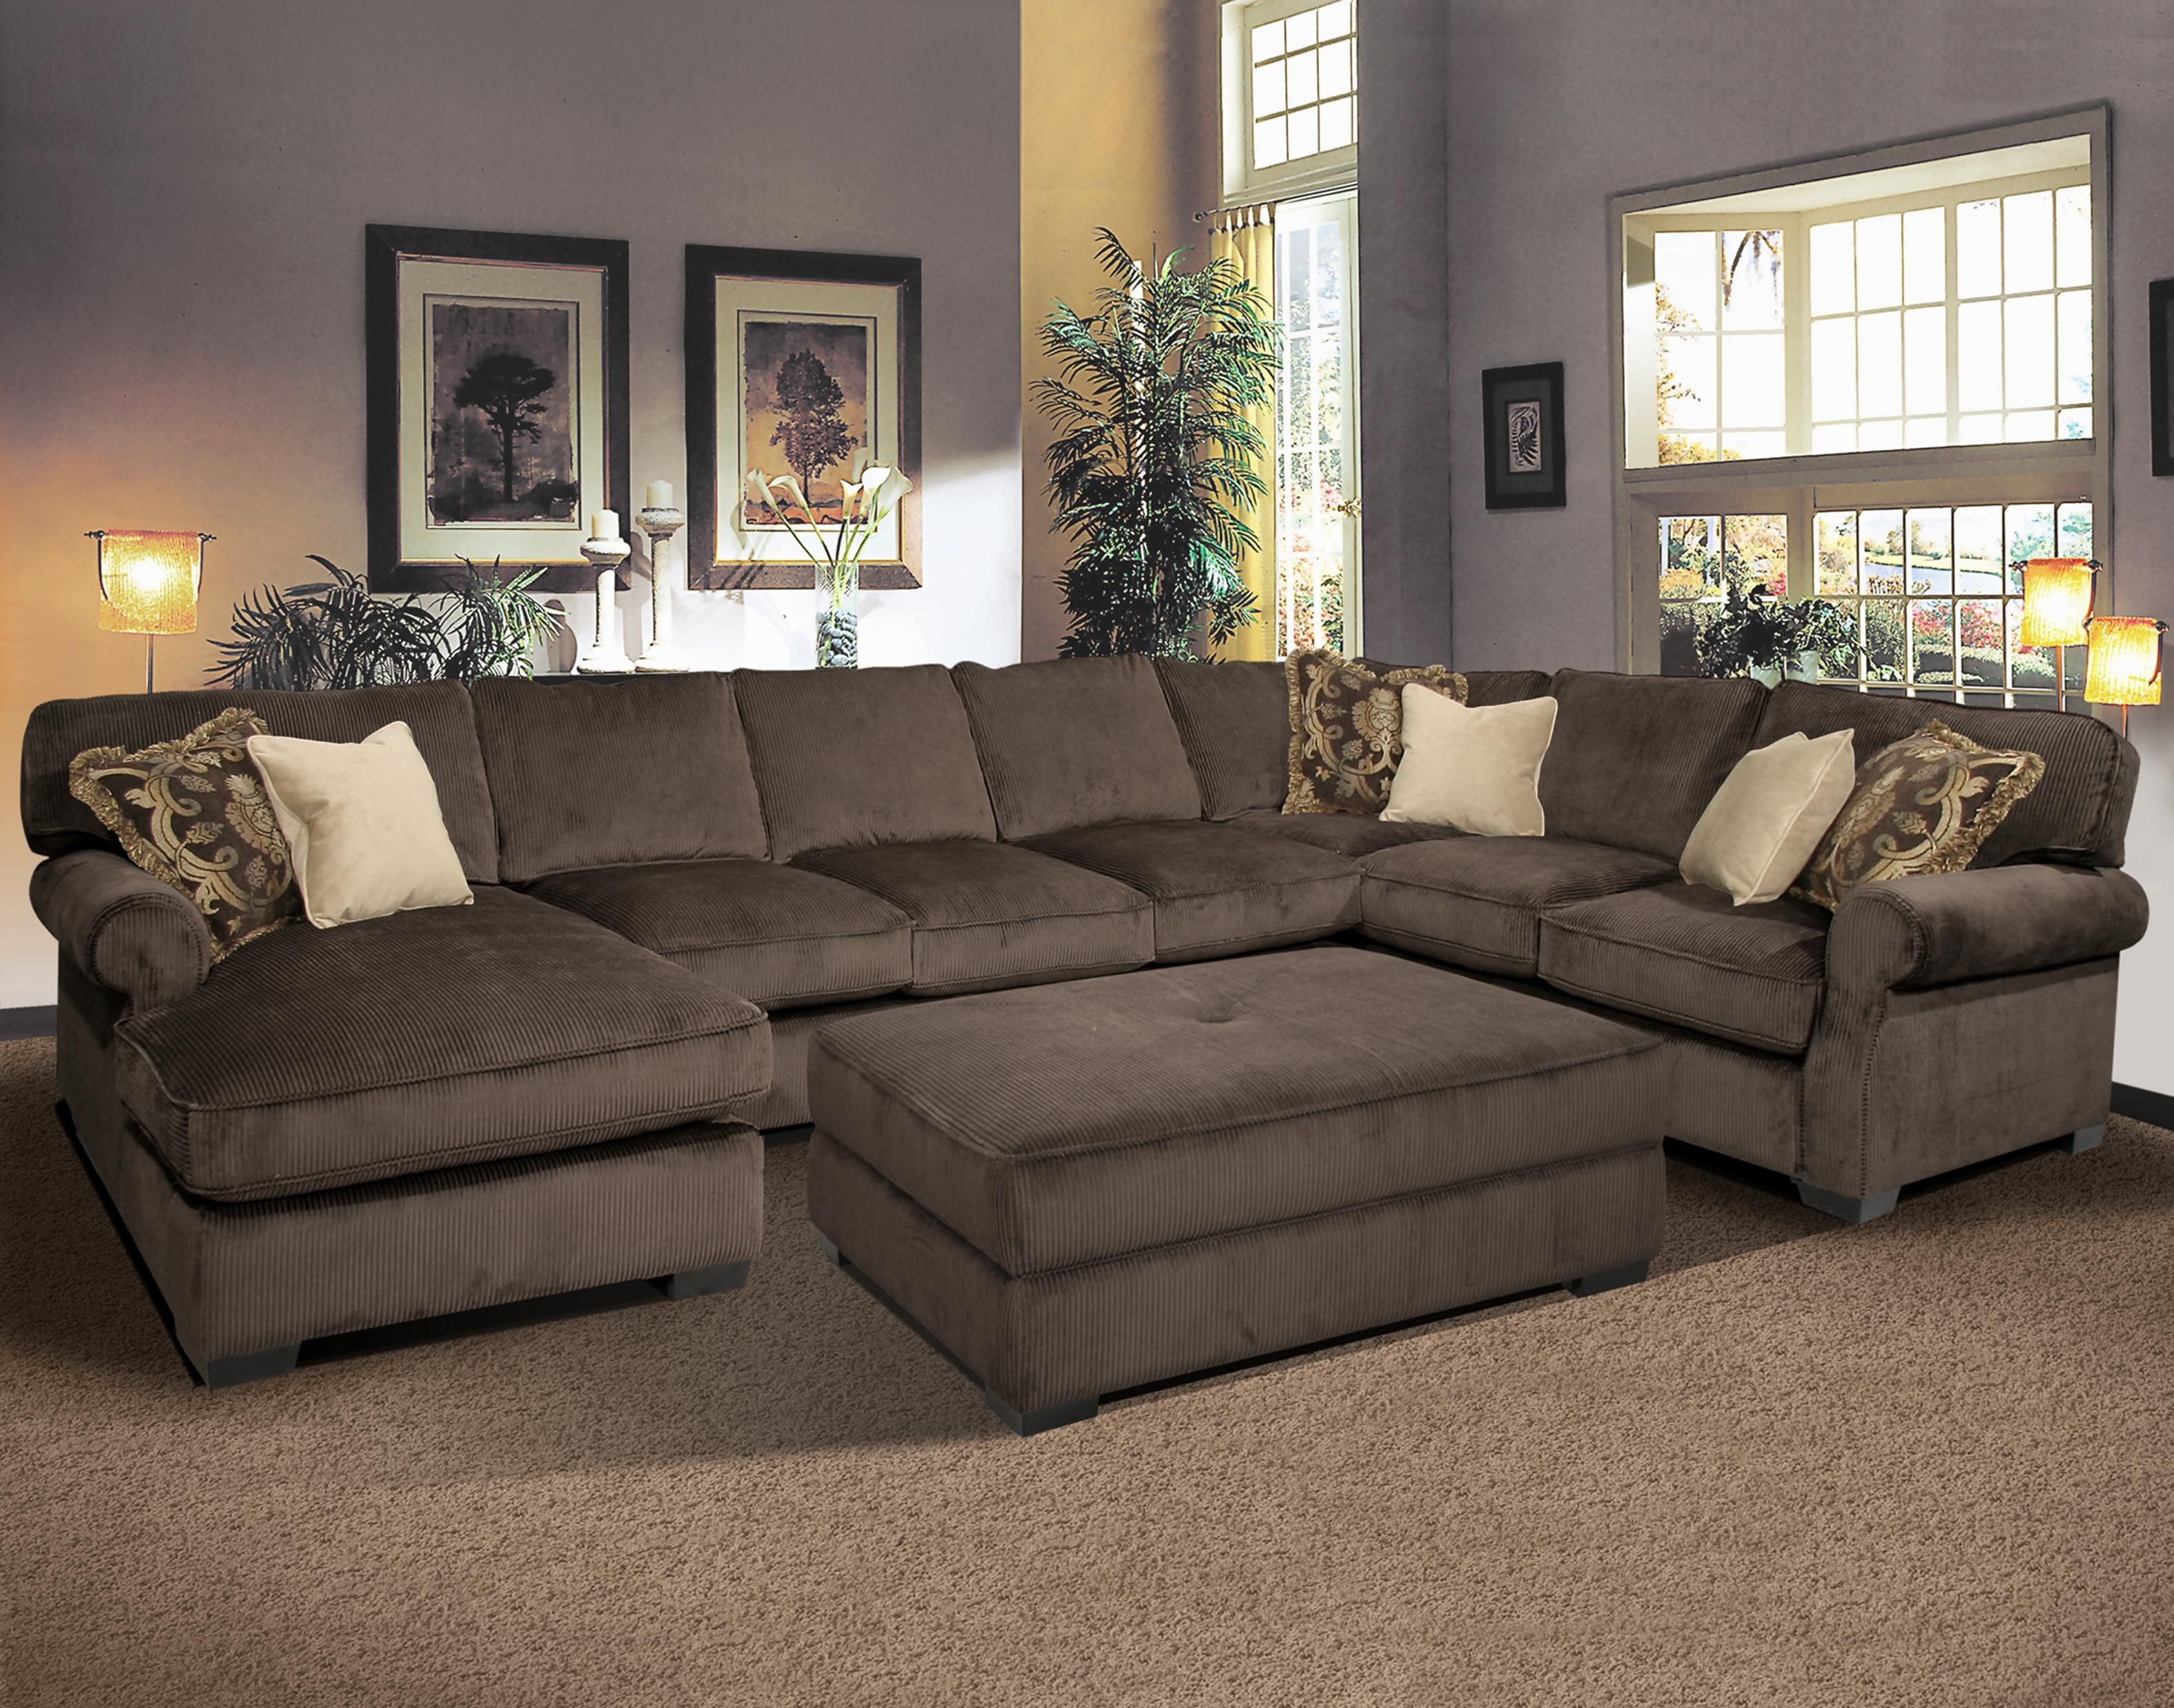 Awesome Comfy Sectional Sofas 26 For Sleeper Sectional Sofa For With Regard To Nz Sectional Sofas (View 9 of 10)